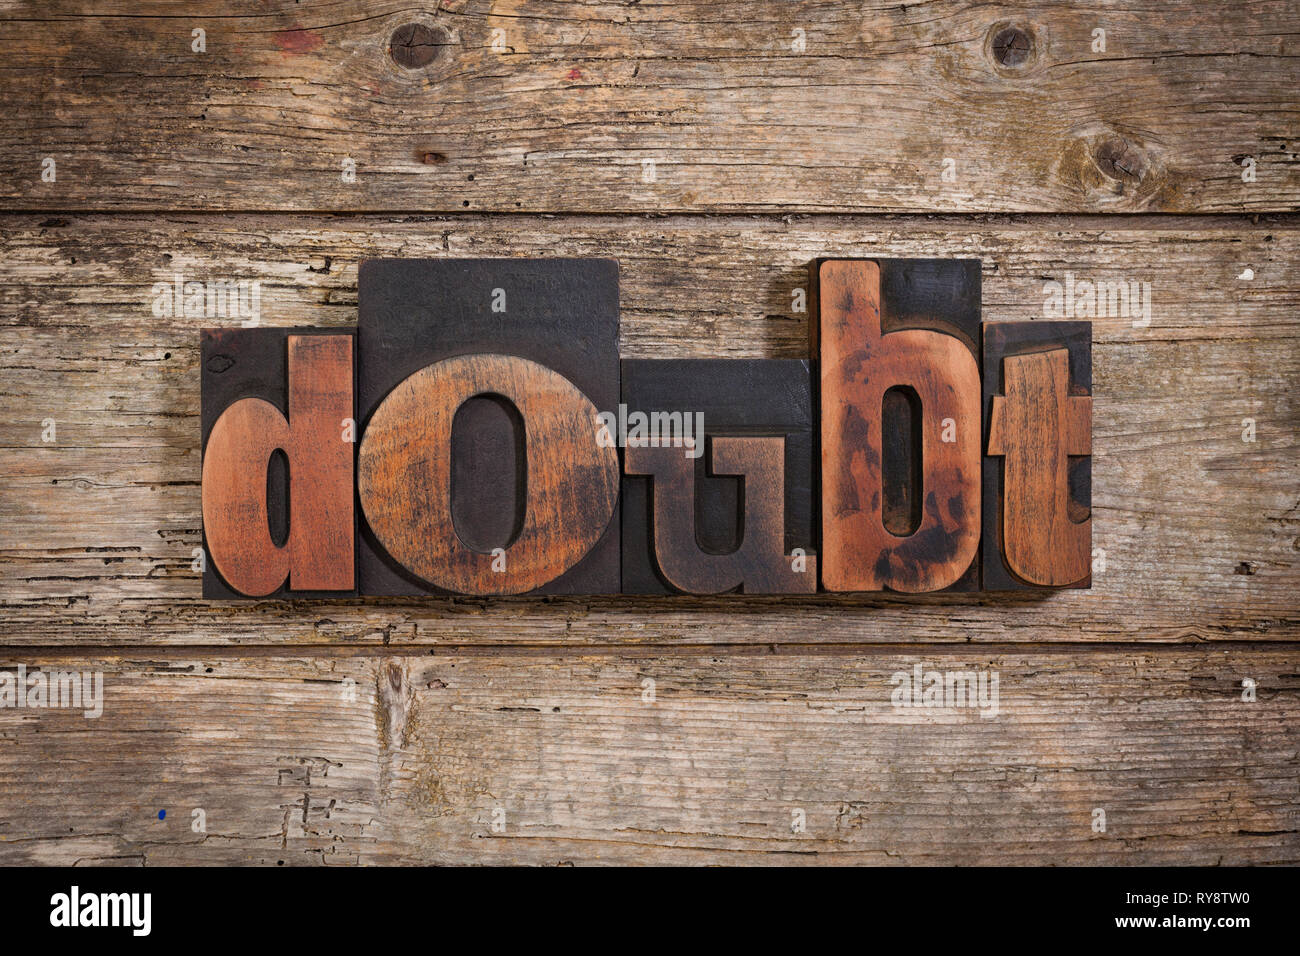 doubt, single word set with vintage letterpress printing blocks on rustic wooden background Stock Photo